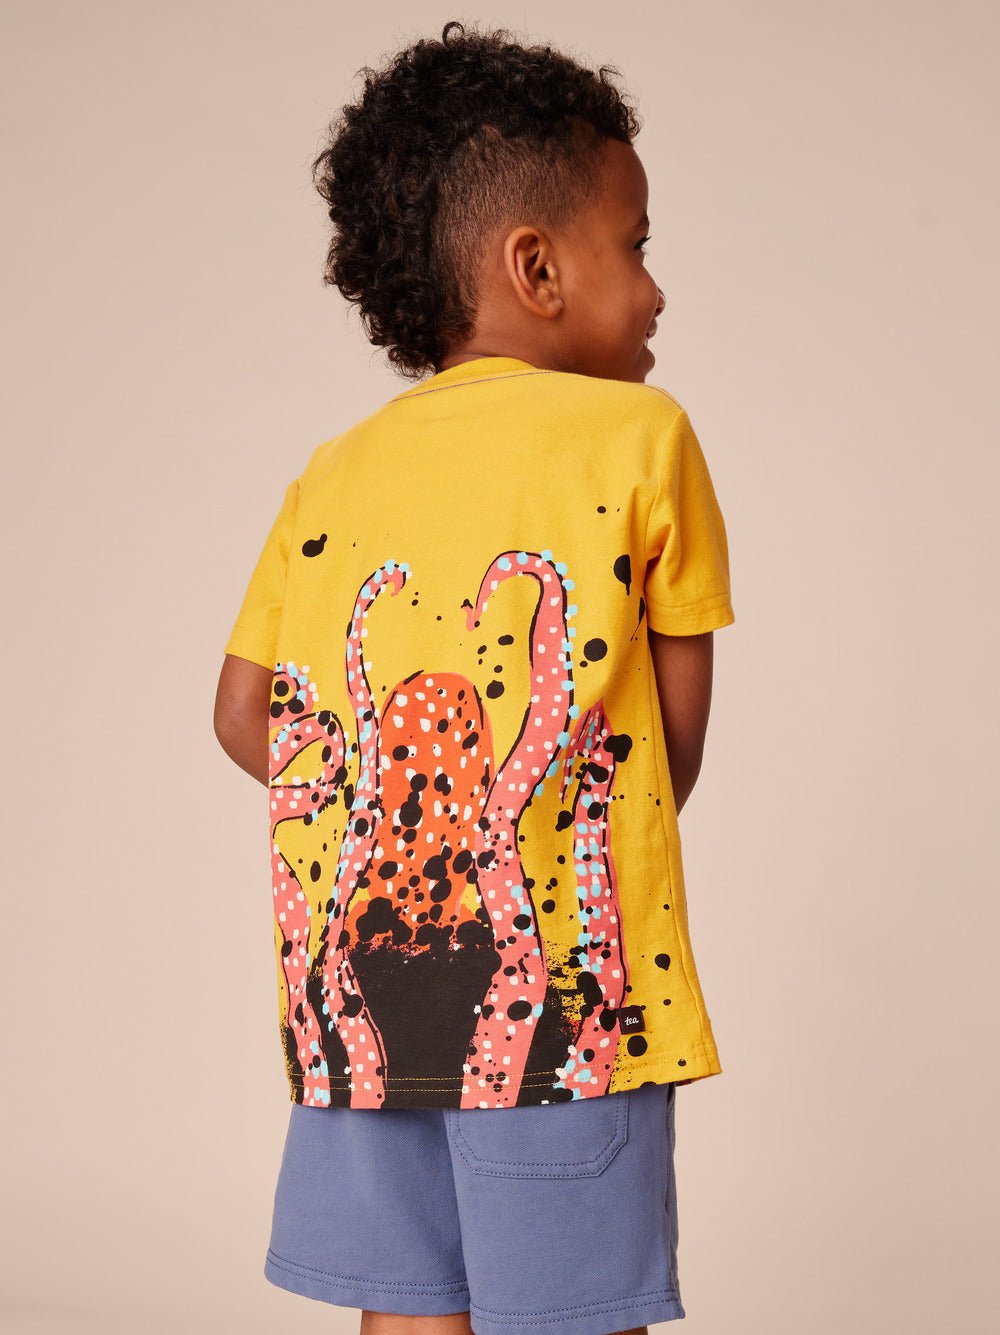 Octopus Ink Graphic Tee, Gold